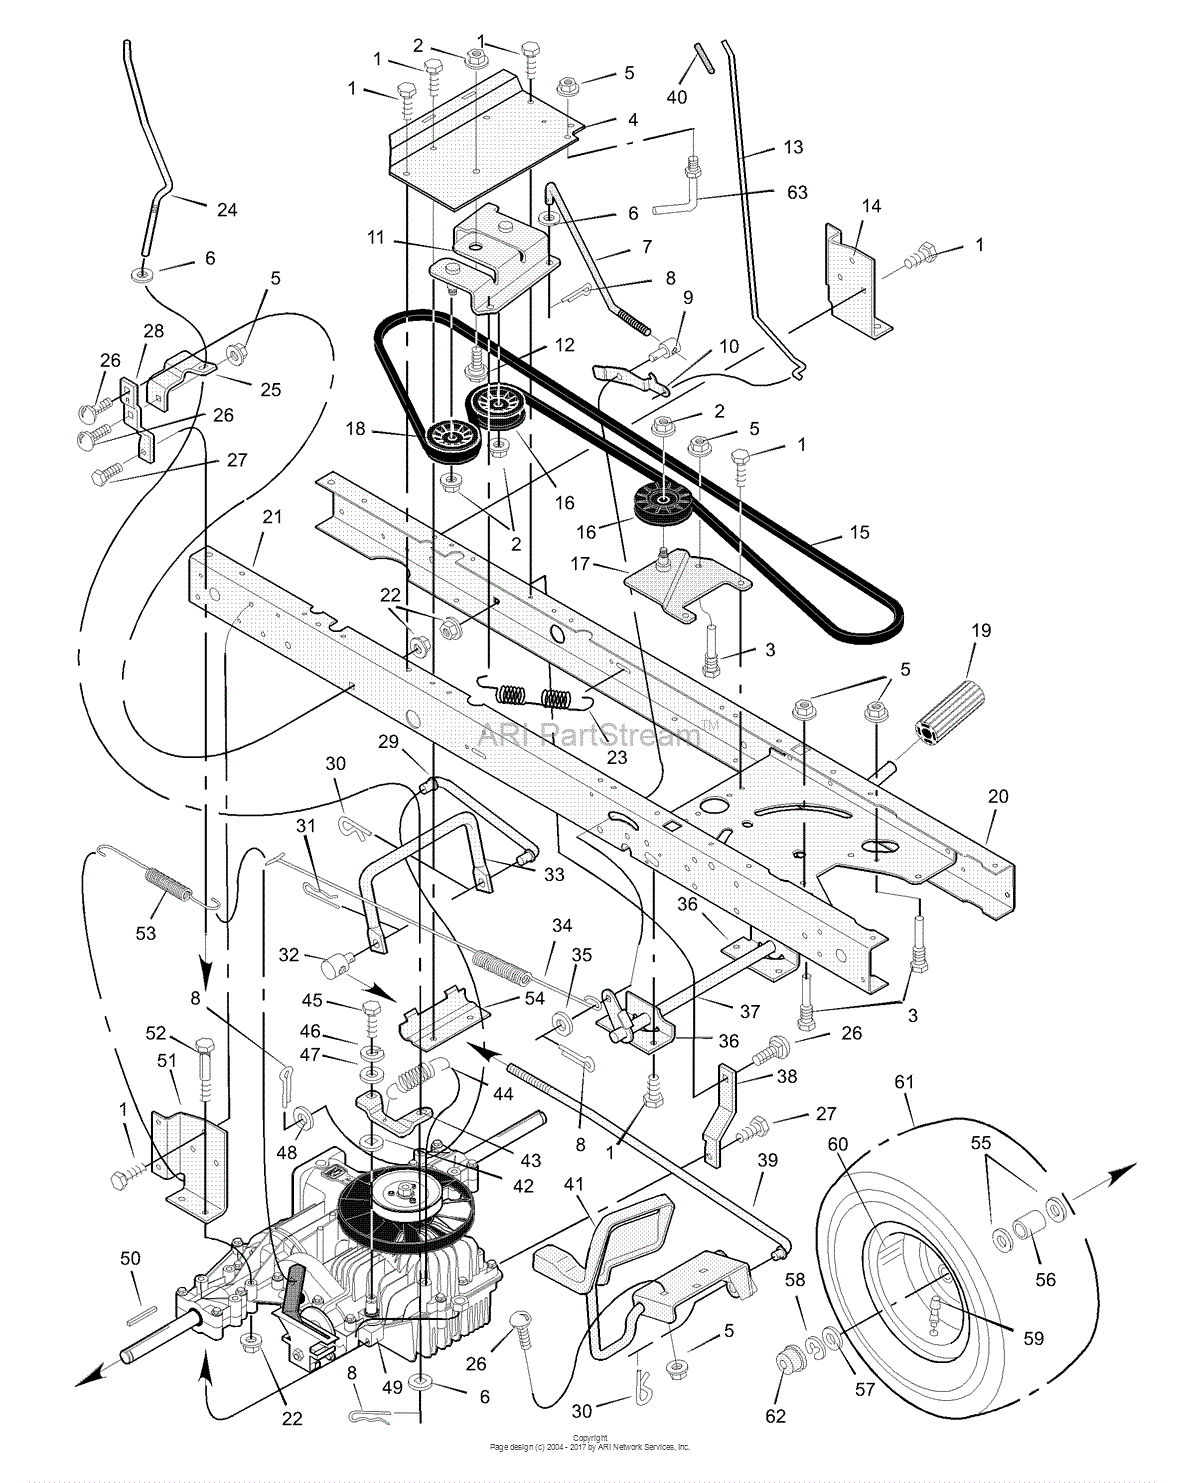 Diagram In Pictures Database Wiring Diagram For Craftsman Lawn Tractor Mower Clutch Just Download Or Read Mower Clutch Pia Guerra Karnaugh Map Onyxum Com